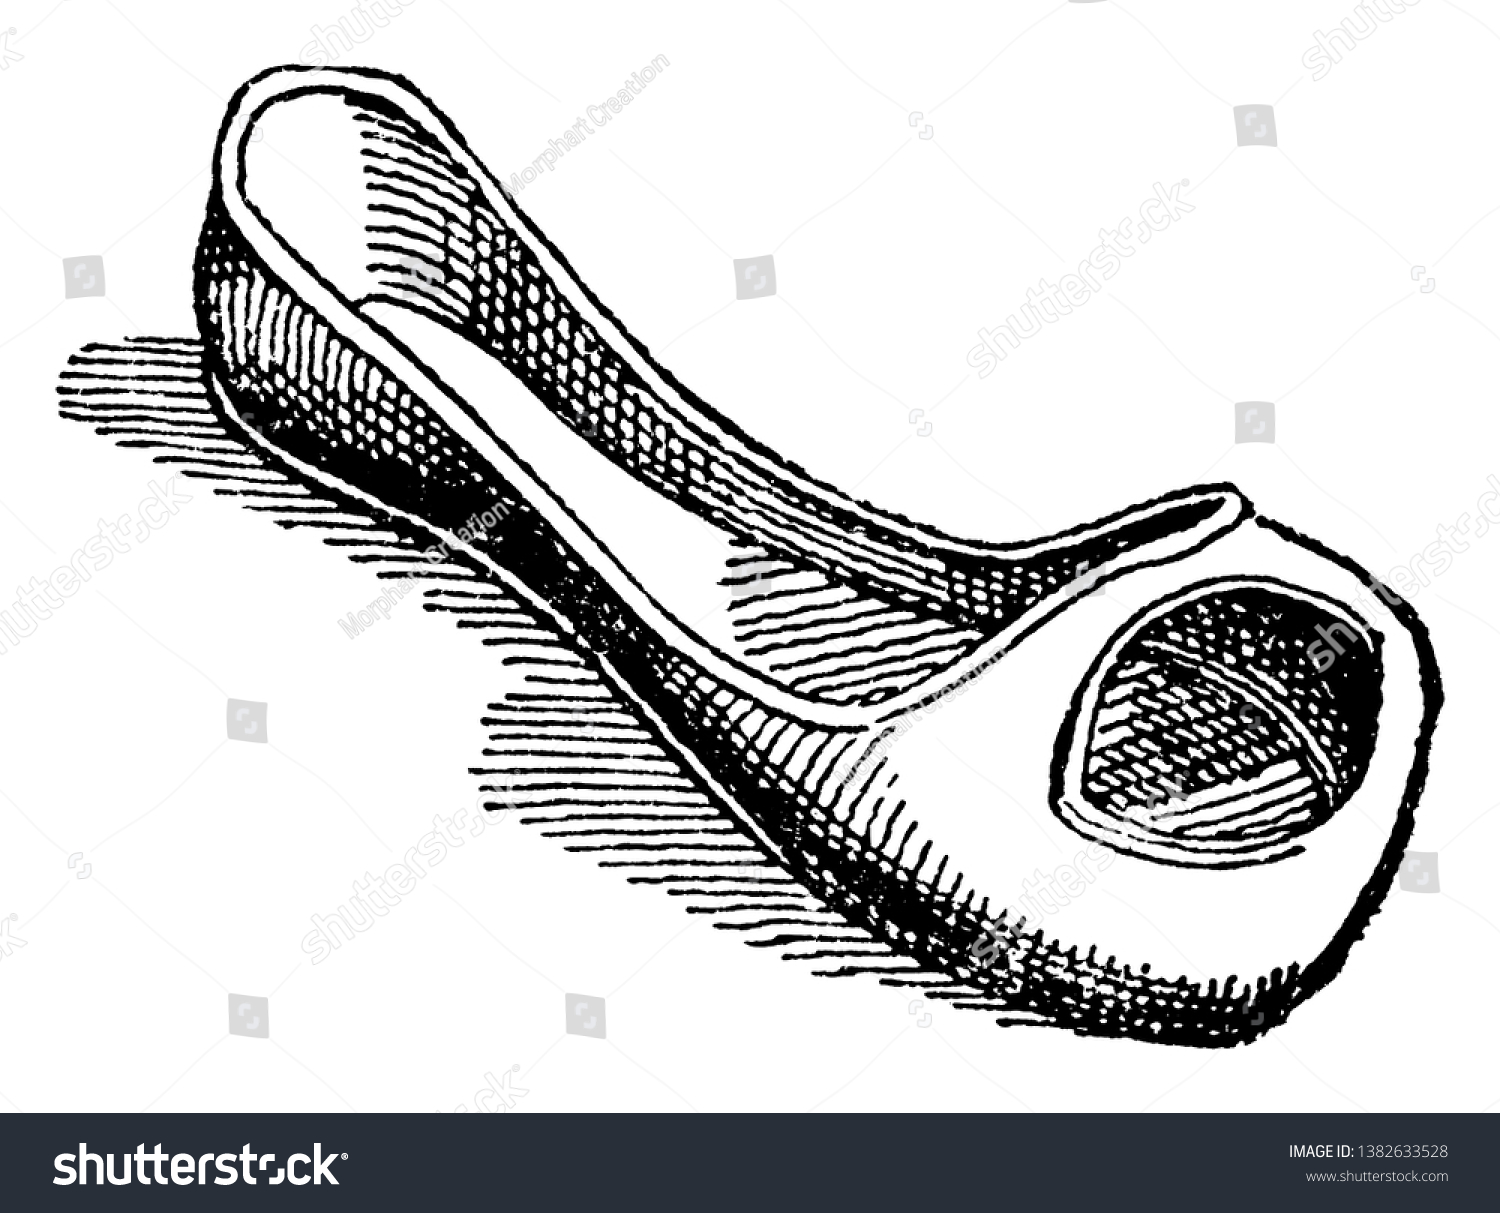 duck billed shoes